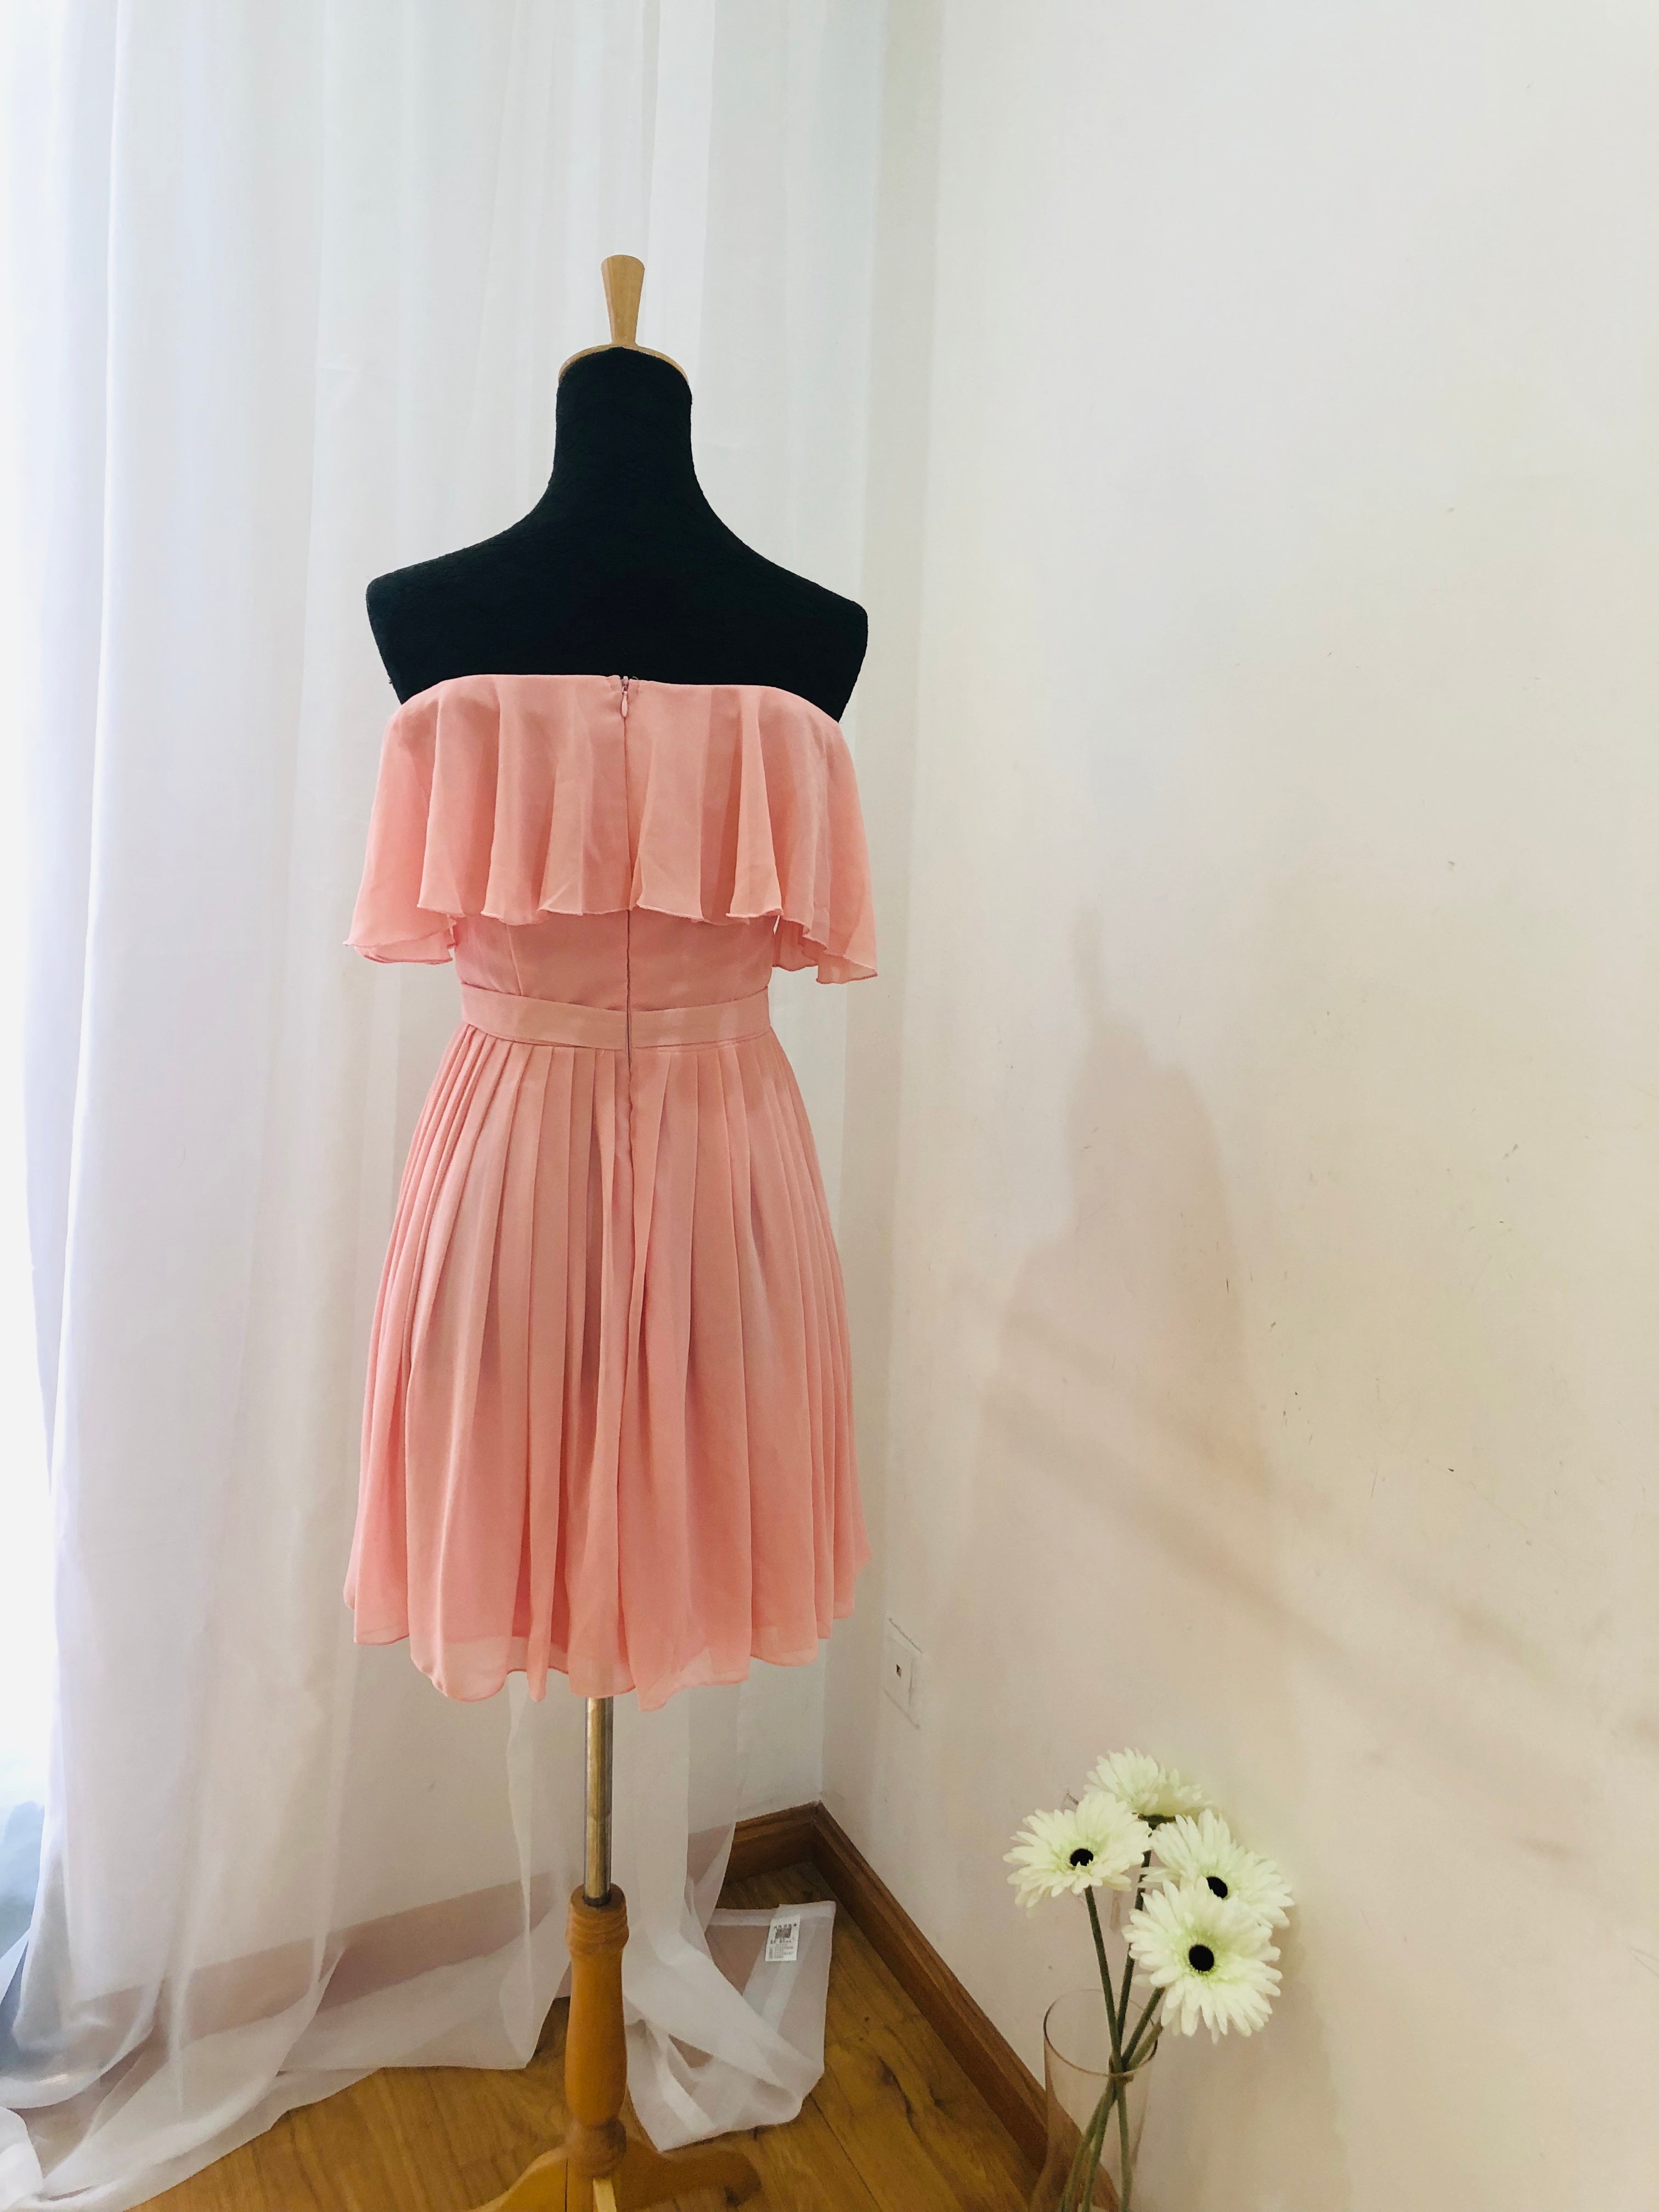 Beautiful Pink Off Shoulder Short Bridesmaid Dress in Stock, Lovely Party Dress, Bridesmaid Dress 2019